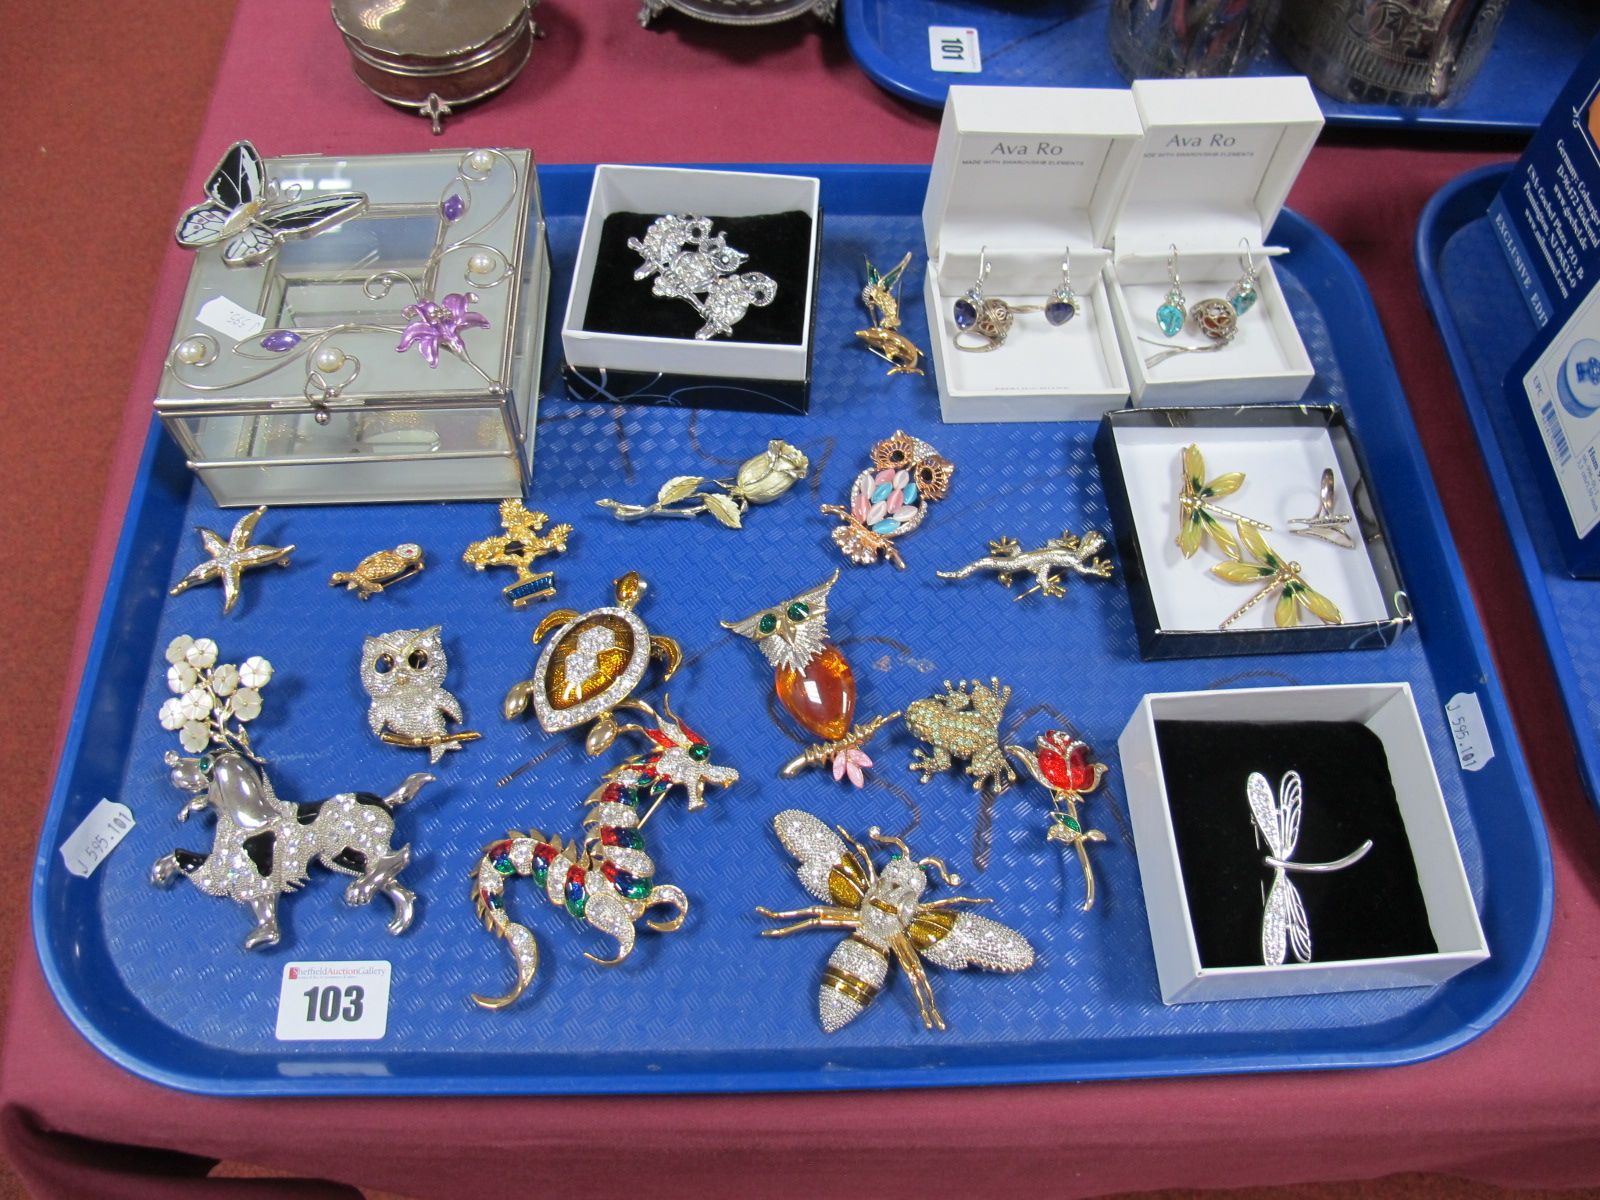 Assorted Modern Costume Brooches, Ava Ro, Swarovski Elements earrings, butterfly ring, jewellery